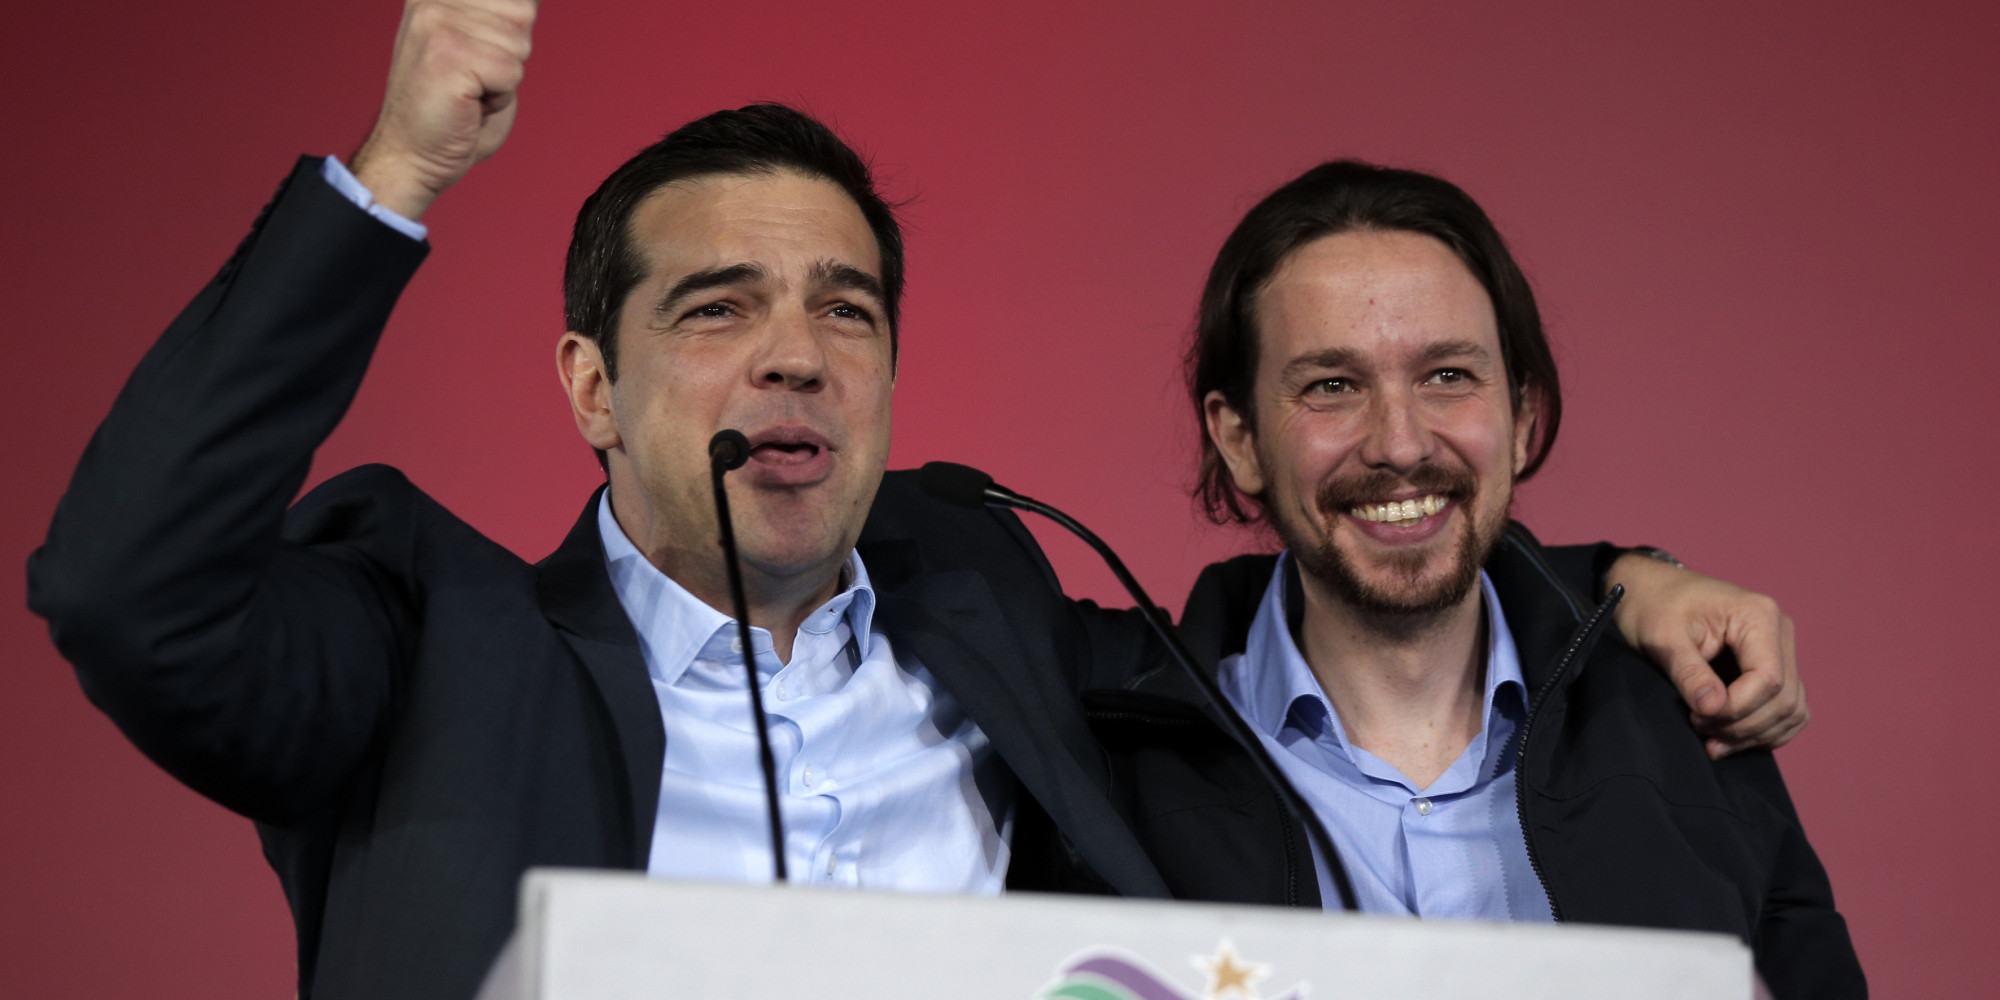 Alexis Tsipras, leader of Greece's Syriza left-wing main opposition party, left, puts his arm around the shoulder of Pablo Iglesias leader of Spanish Podemos left-wing party after a pre-election speech at Omonia Square in Athens on Thursday, Jan. 22, 2015. Prime Minister Antonis Samaras' New Democracy party has failed so far to overcome a gap in opinion polls with the anti-bailout Syriza party ahead of the Jan. 25 general election. (AP Photo/Lefteris Pitarakis)